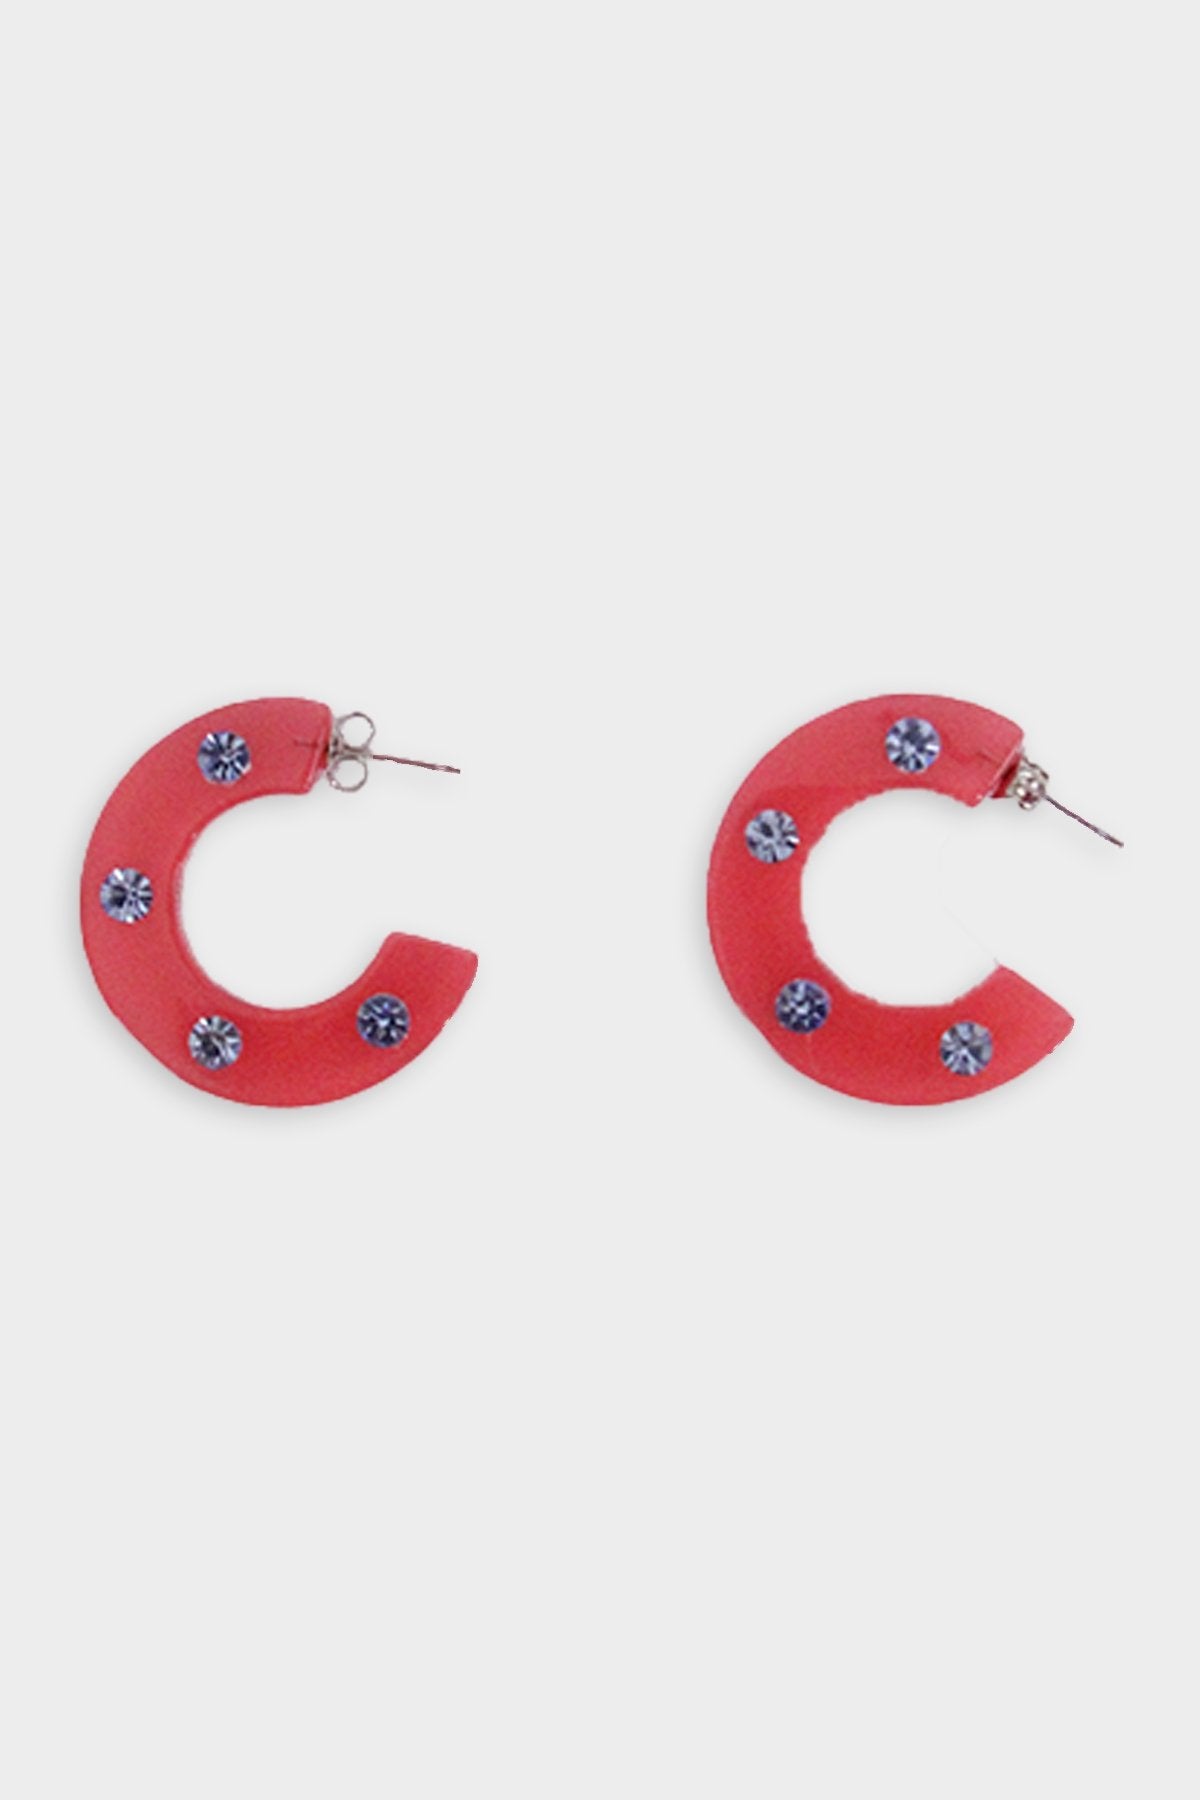 Paradise Earrings in Coral - shop-olivia.com